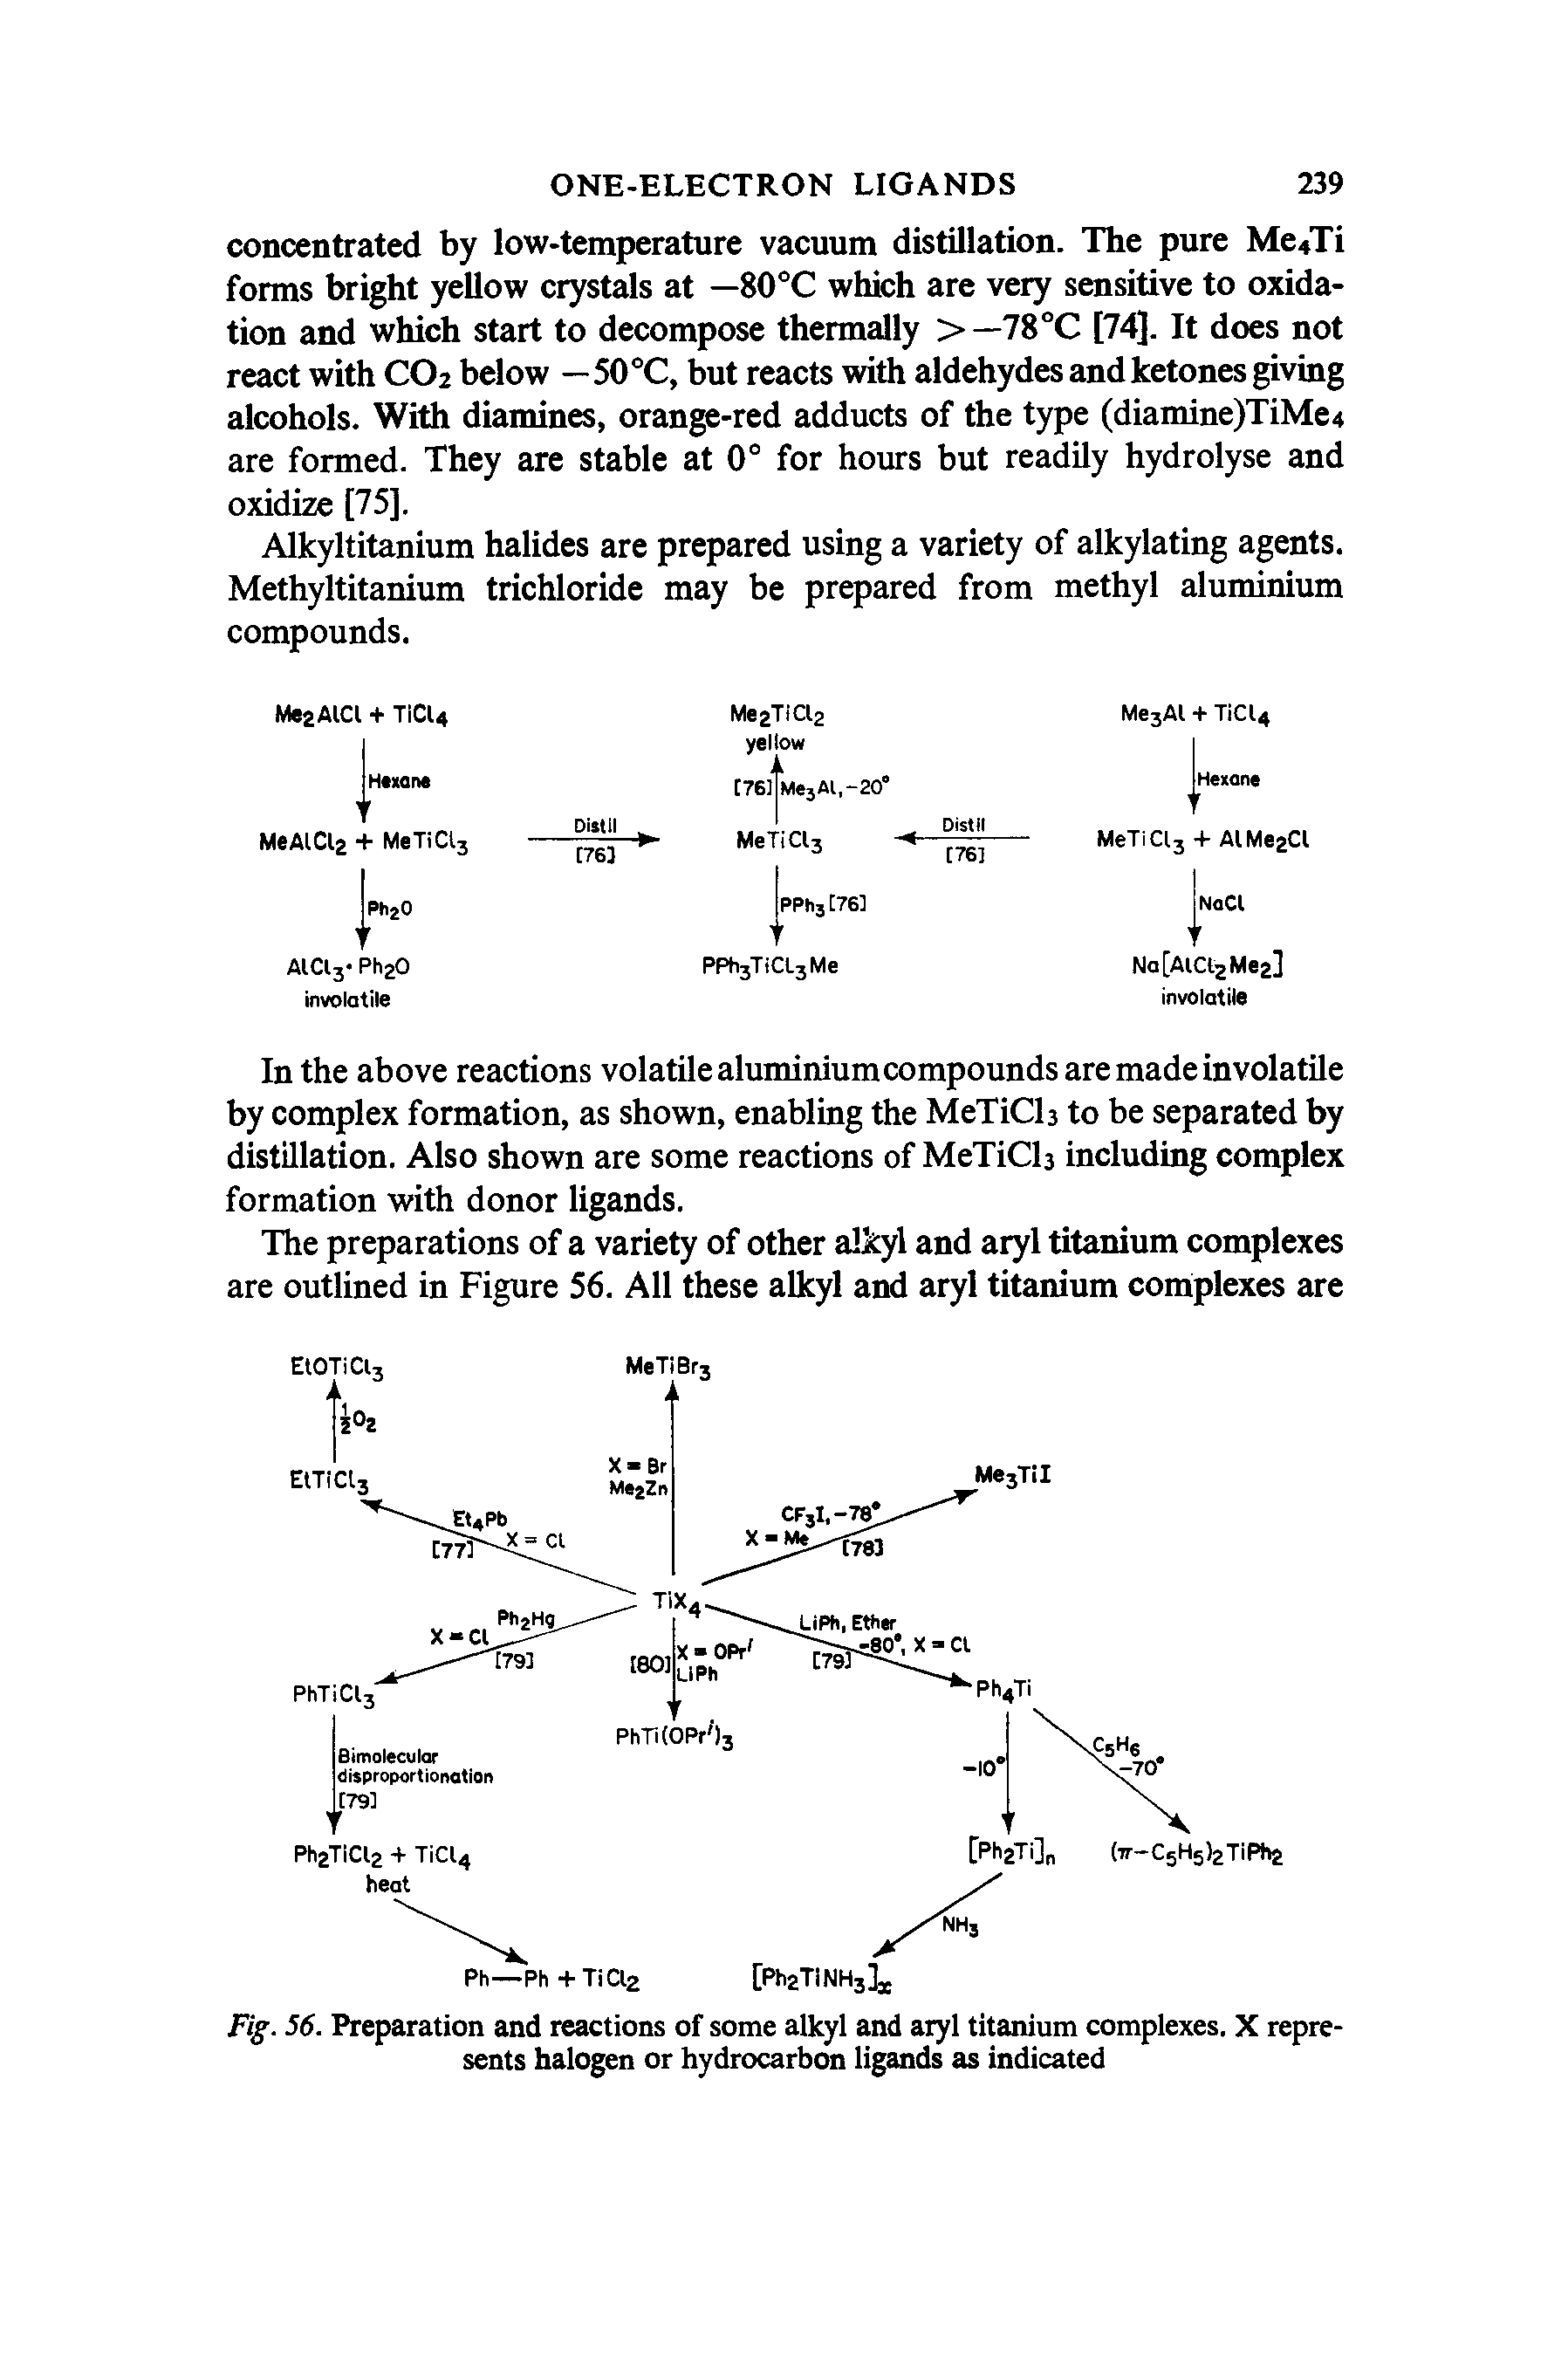 Fig. 56. Preparation and reactions of some alkyl and aryl titanium complexes. X represents halogen or hydrocarbon ligands as indicated...